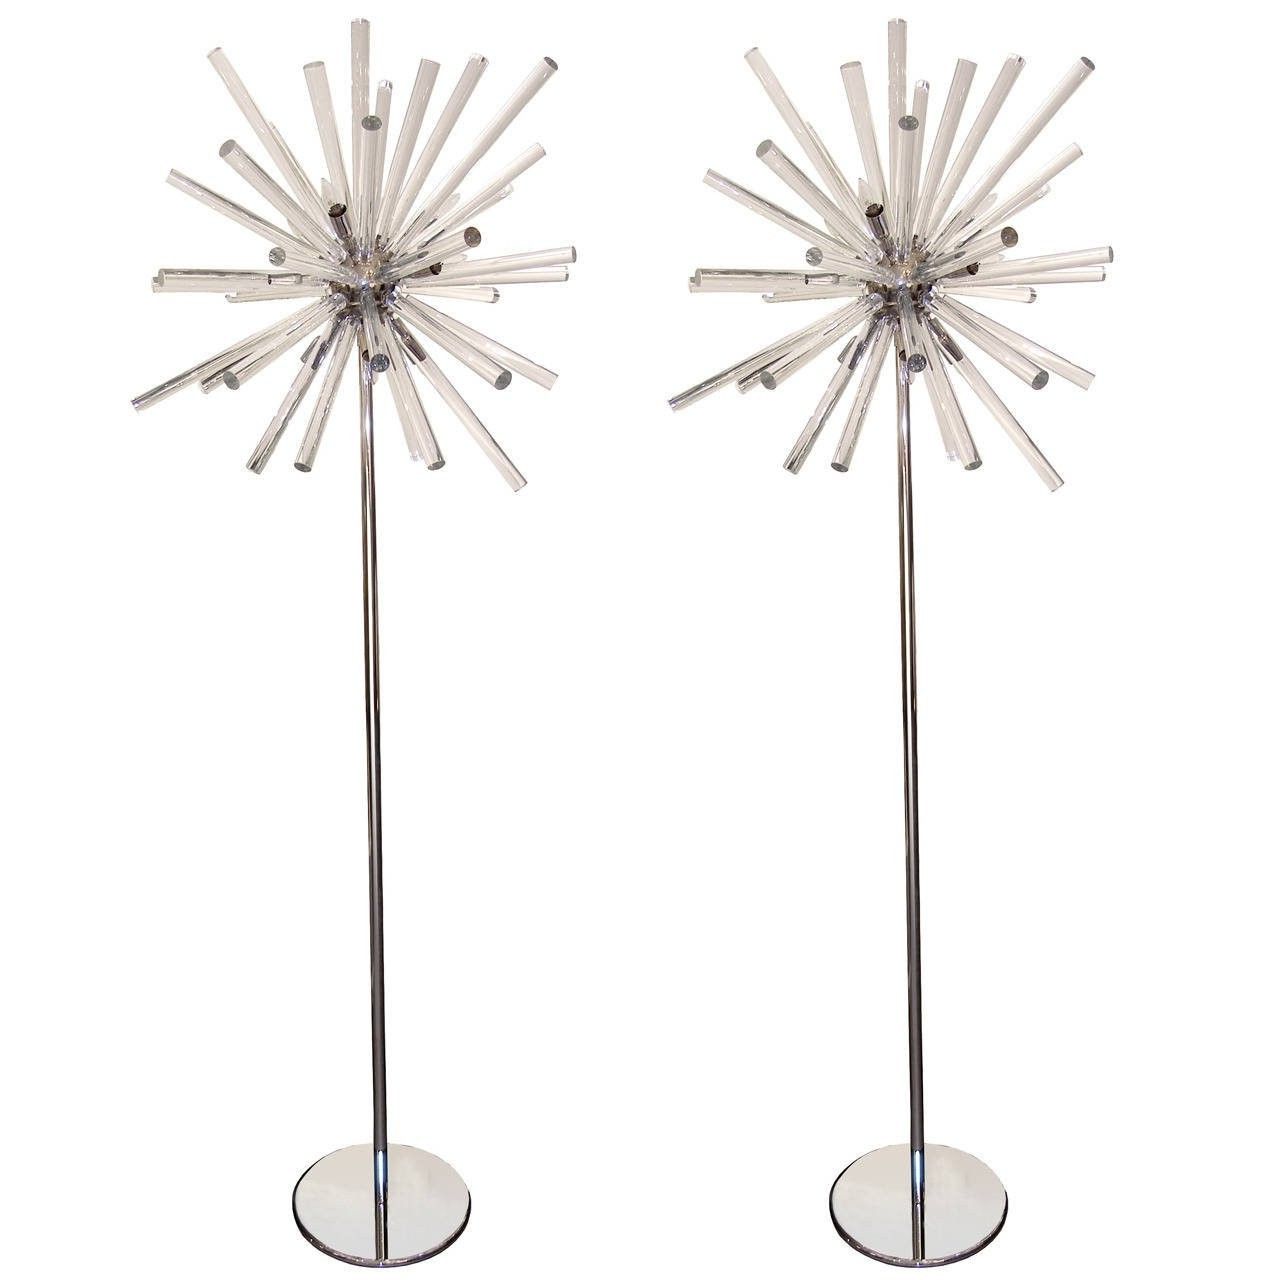 Pair Of Stainless Steel And Glass Sputnik Floor Lamps – Floor Lamps –  Lighting – Inventory With Regard To Sputnik Floor Lamps (View 4 of 20)